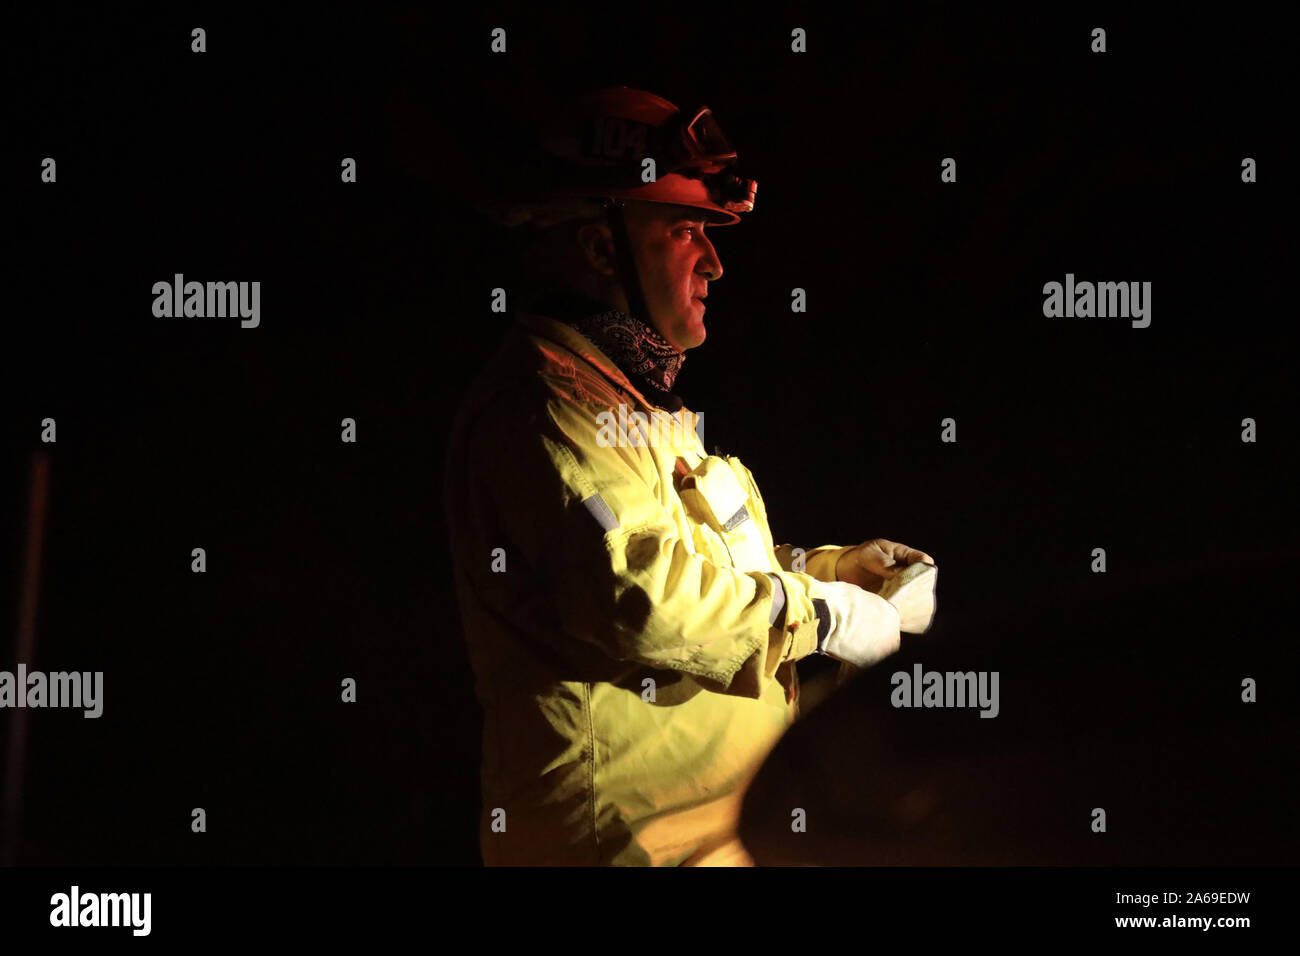 Santa Clarita, California, USA. 24th Oct, 2019. Firefighters respond to the 5000 Tick Fire which started in Agua Dulce and spread toward Santa Clarita, California. Credit: David Swanson/ZUMA Wire/Alamy Live News Stock Photo